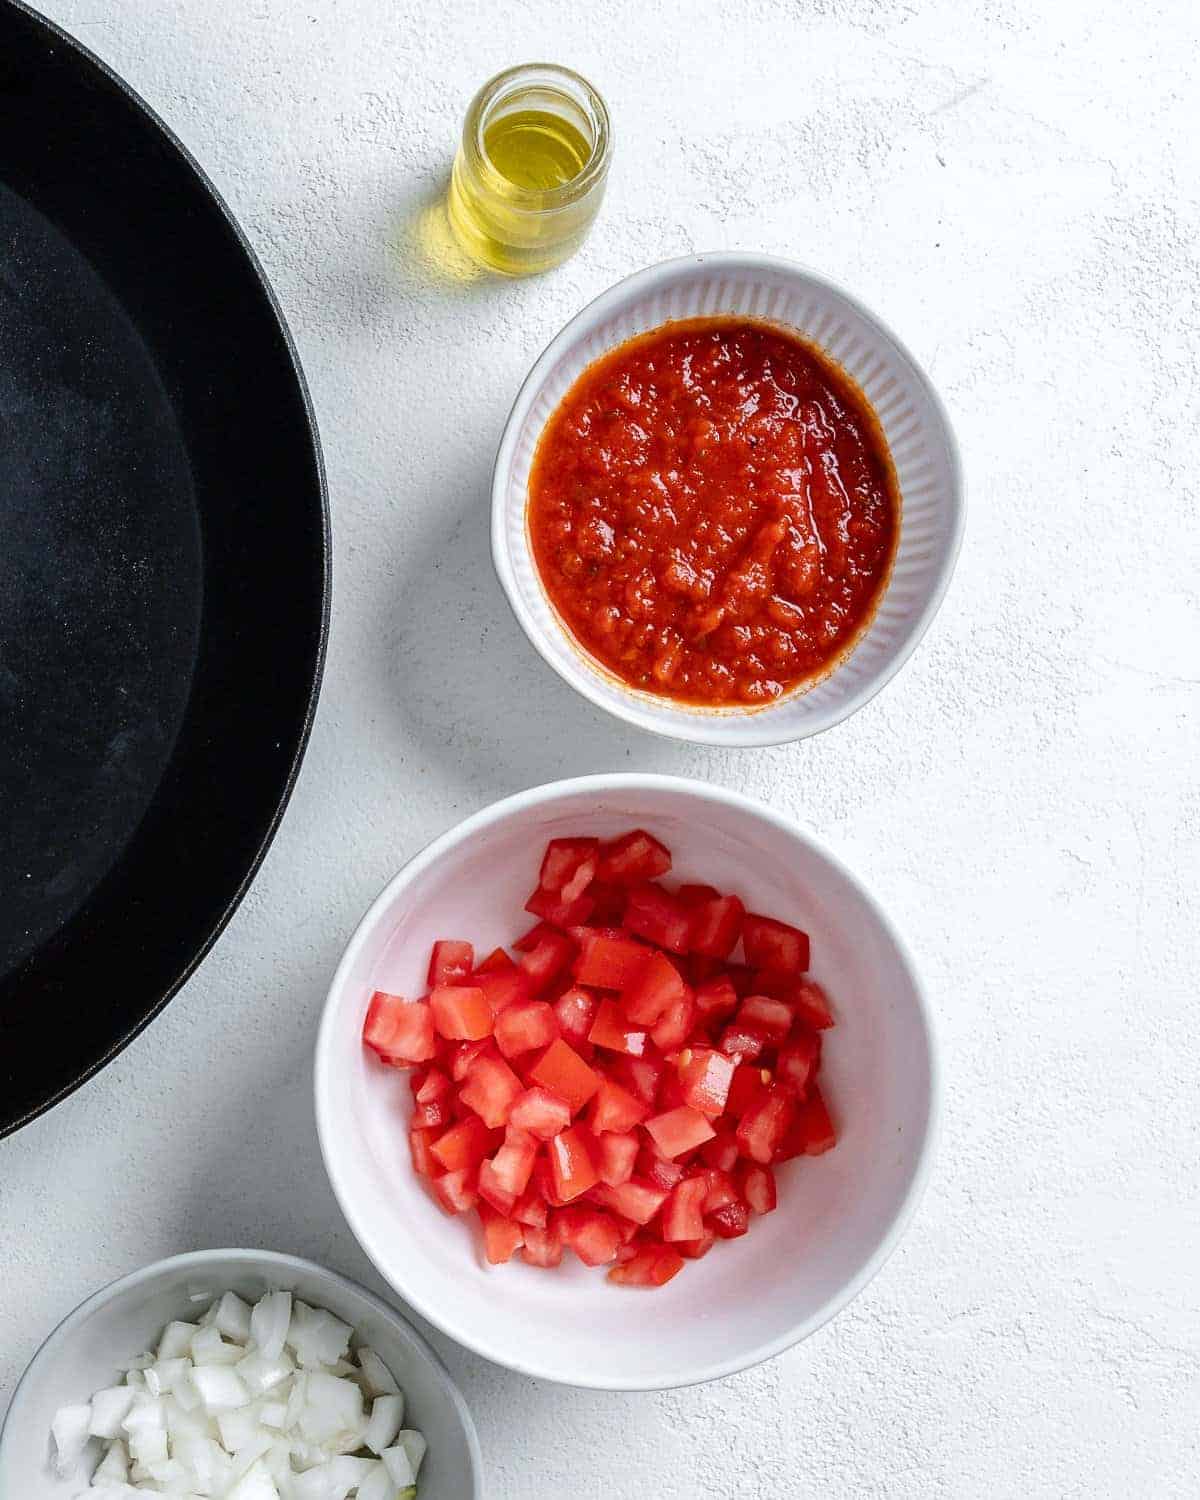 diced tomatoes and marinara sauce in individual bowls against white surface